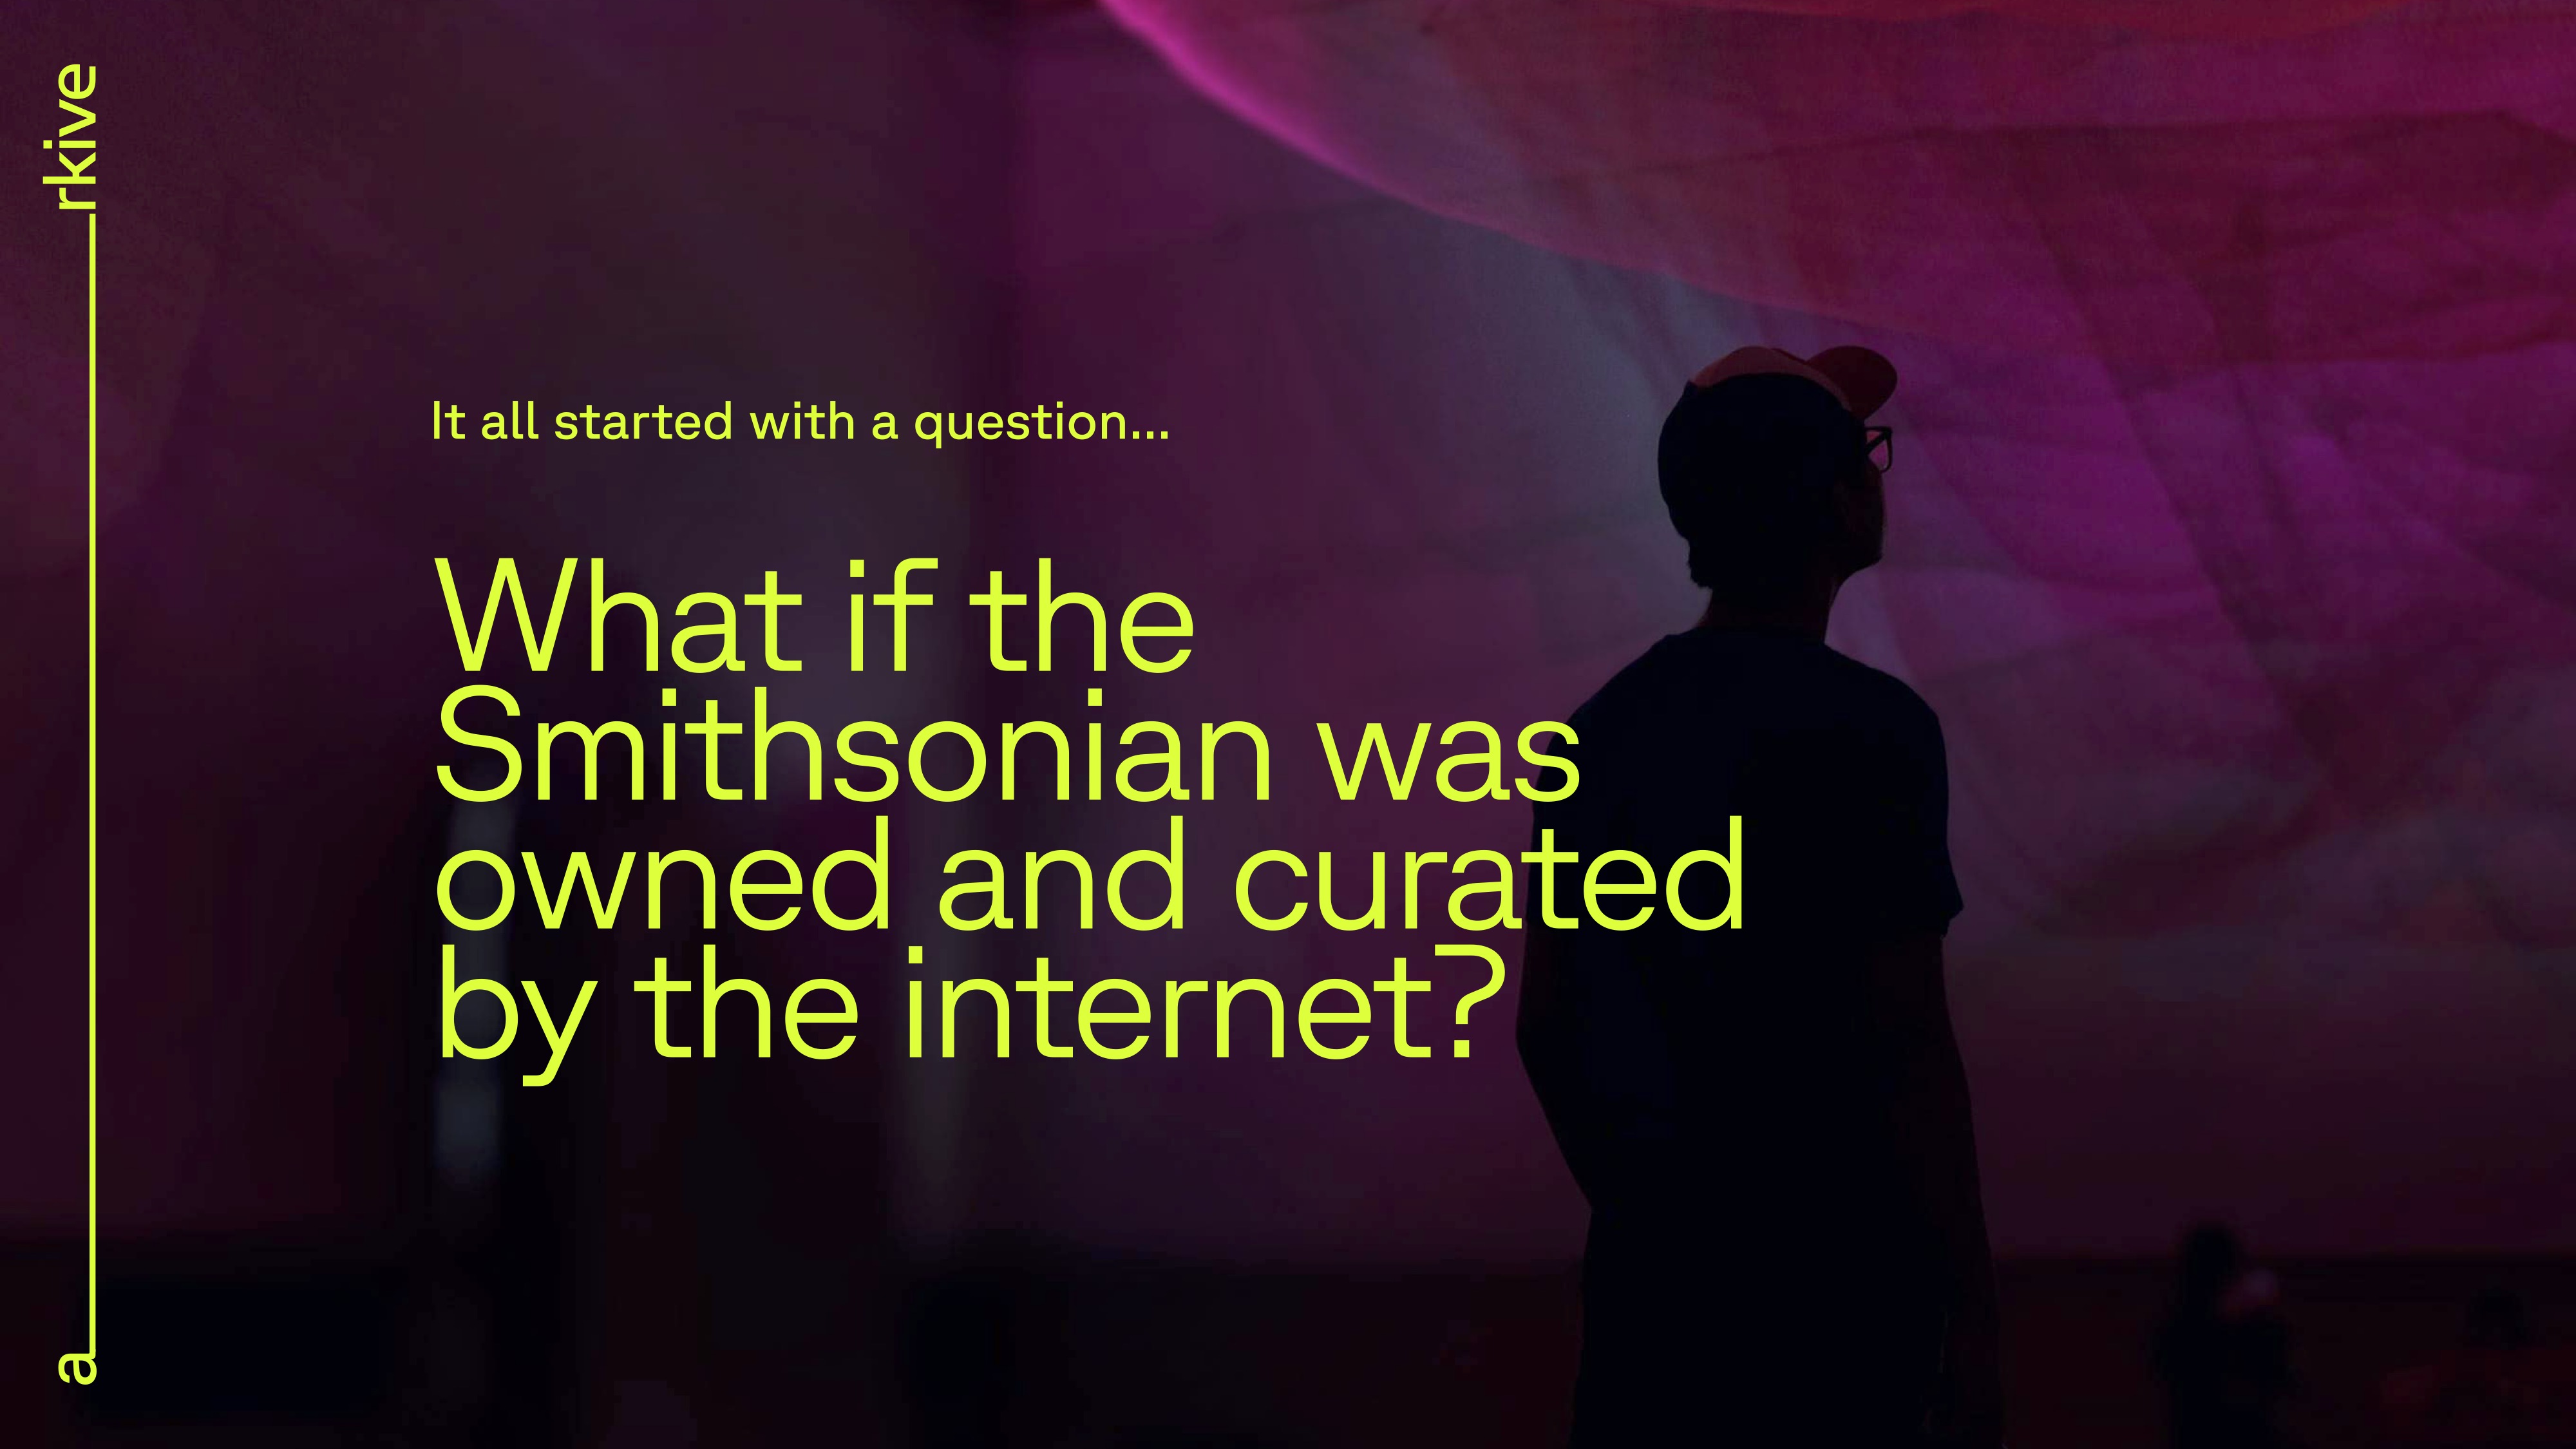 Arkive slide 2 - What if the Smithsonian was owned and curated by the internet?